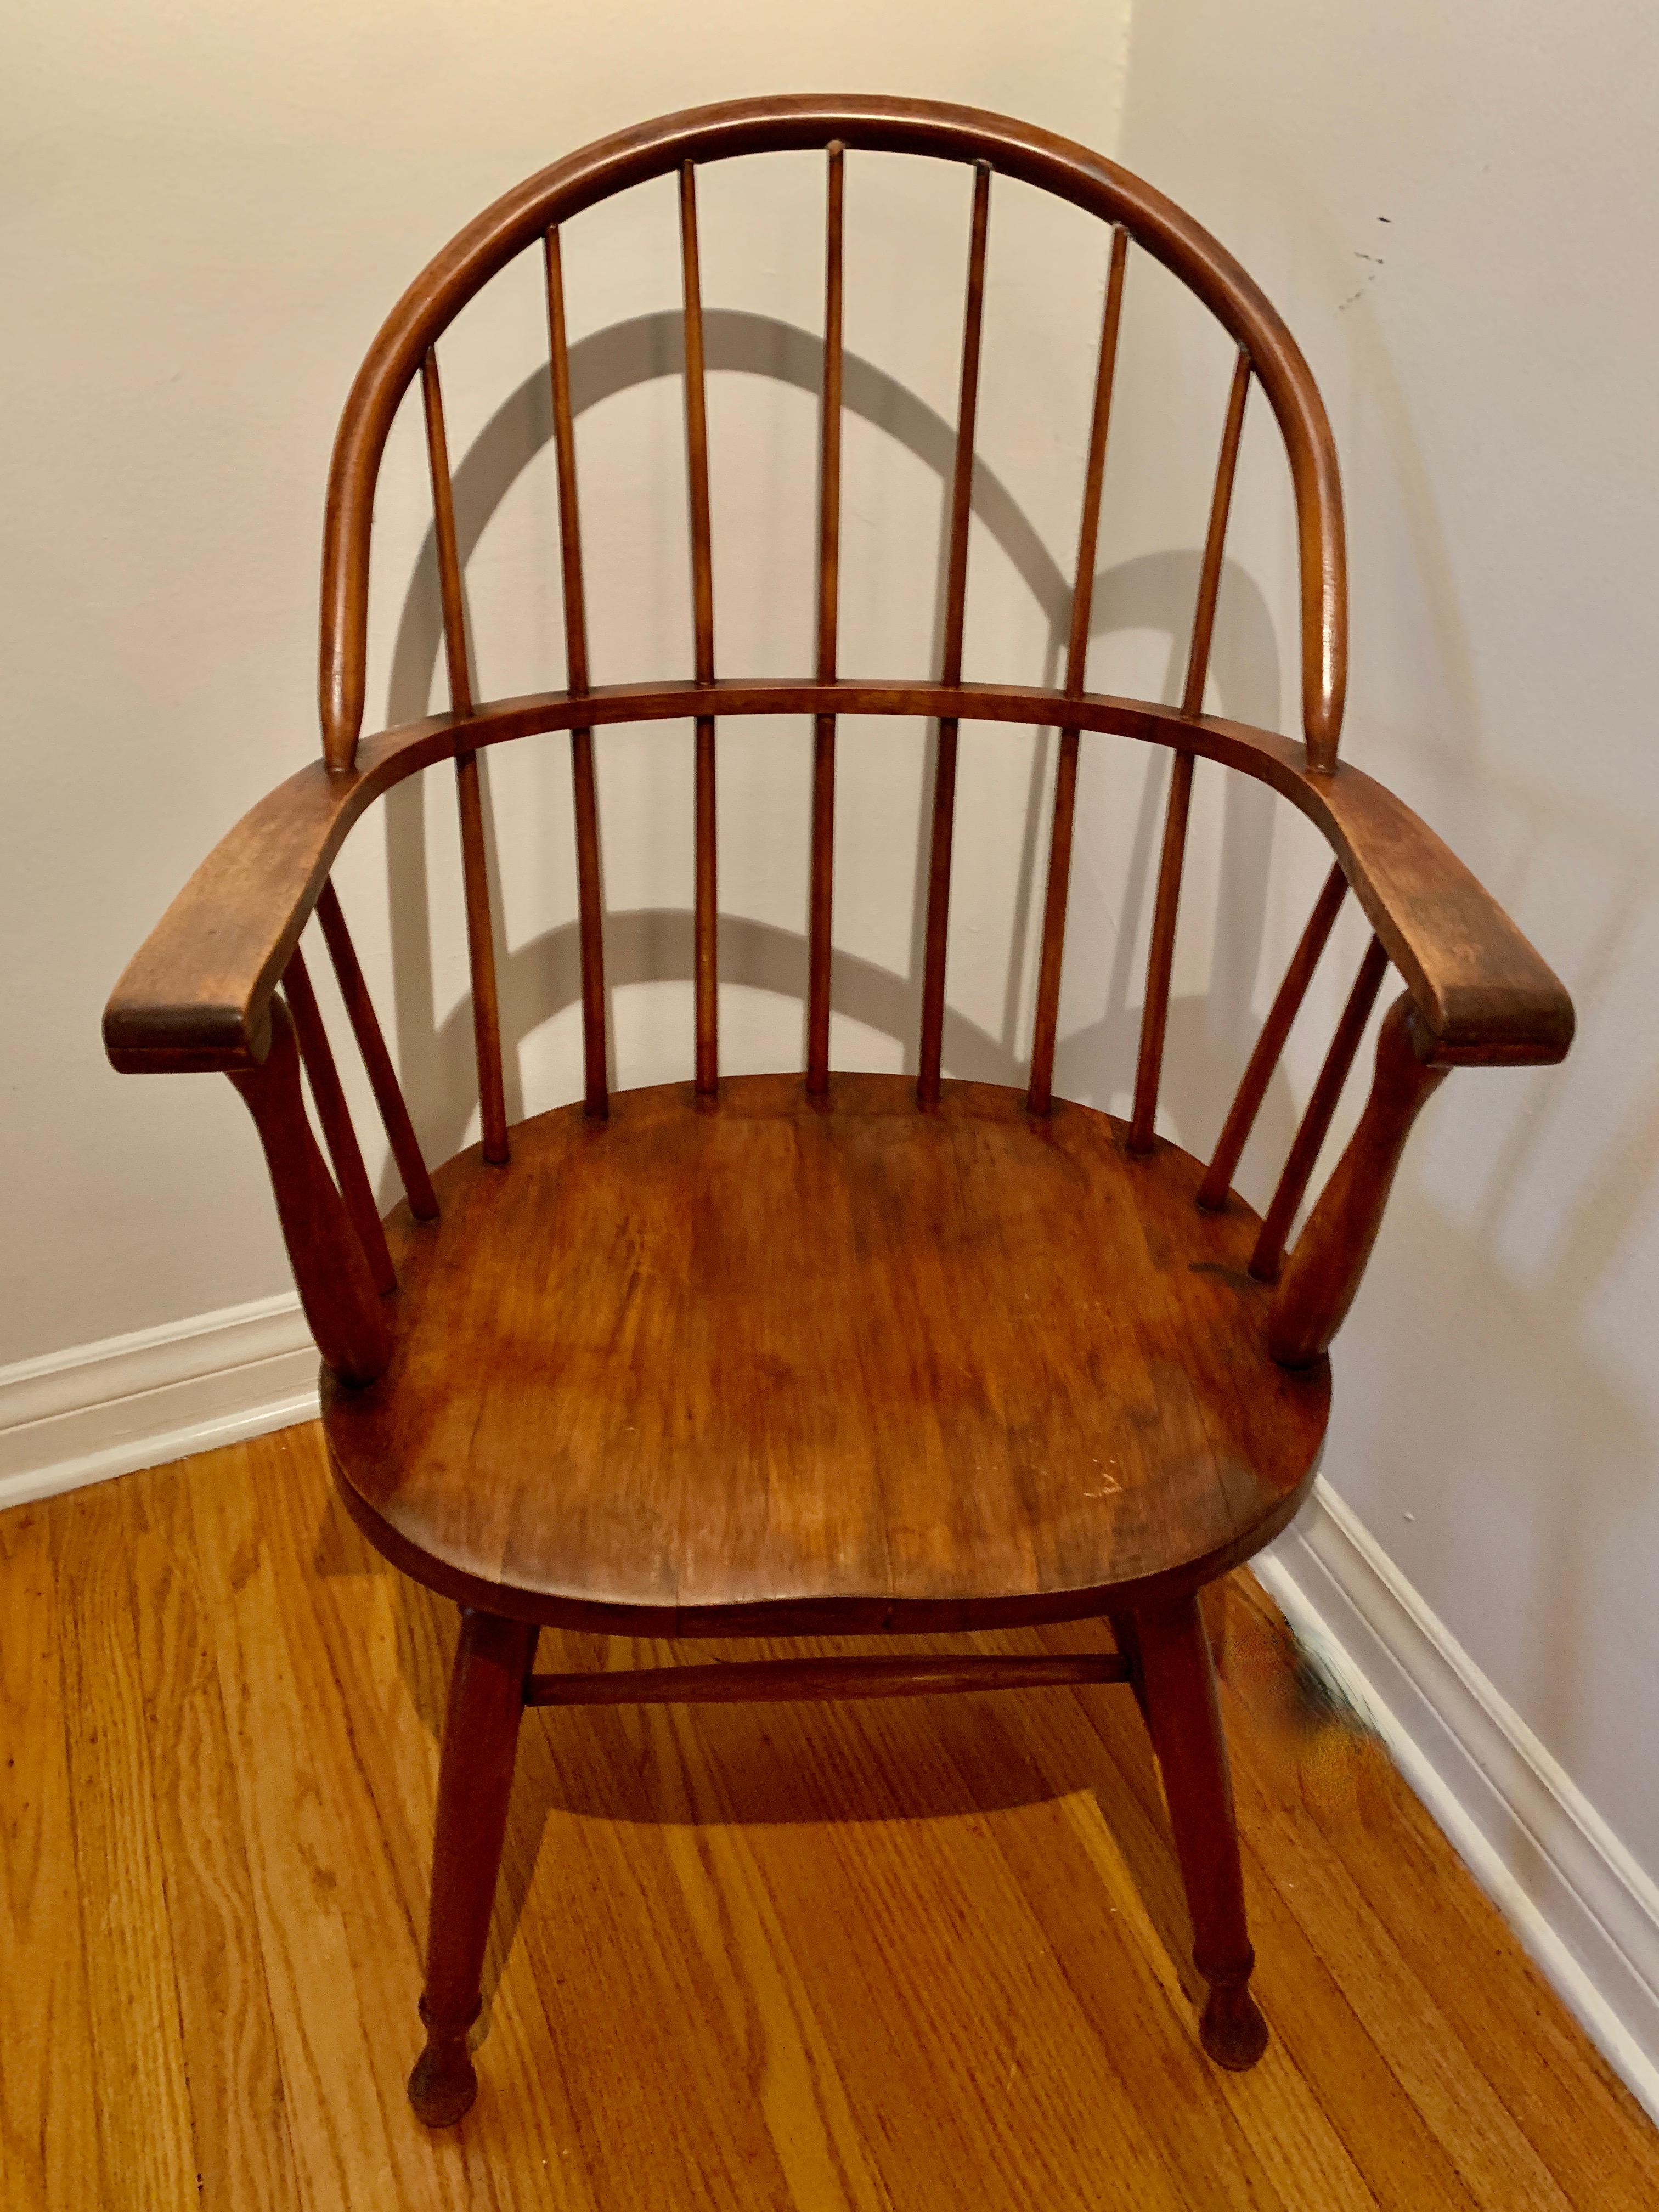 A wonderful example of Windsor Chair. The hand made quality shows and for the age, the piece is in great condition. Because the style of this particular Windsor has no frilly detailing, it works well in many spaces... from contemporary to